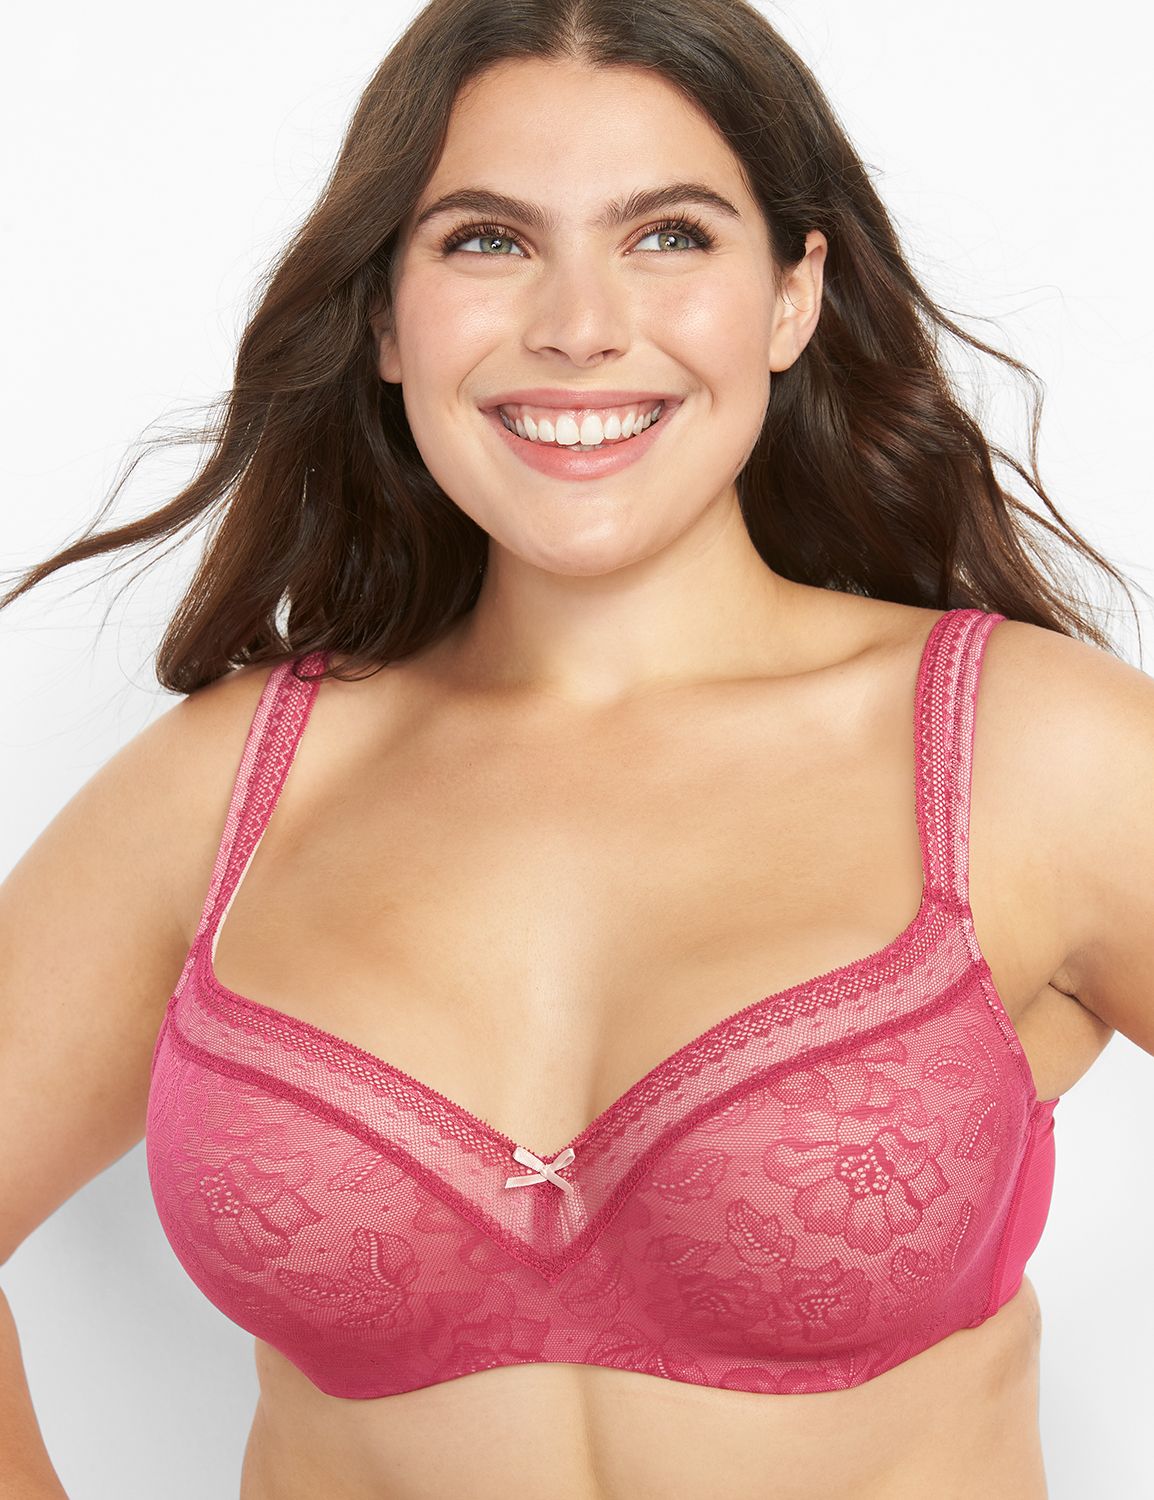 Cacique Modern Lace Covered LL BALC bra plus size 44D - $32